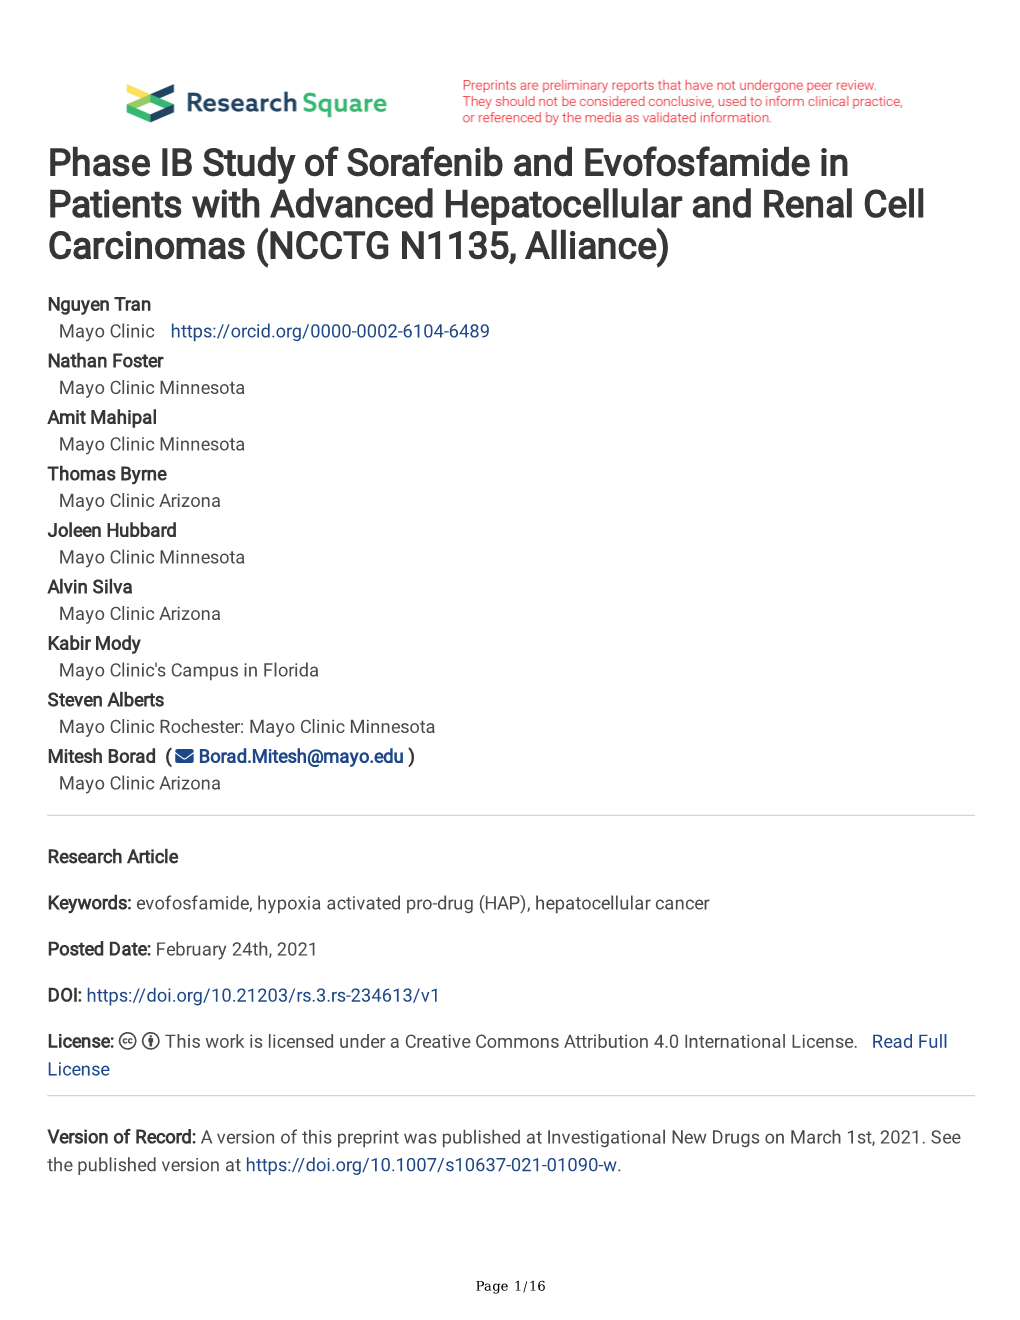 Phase IB Study of Sorafenib and Evofosfamide in Patients with Advanced Hepatocellular and Renal Cell Carcinomas (NCCTG N1135, Alliance)